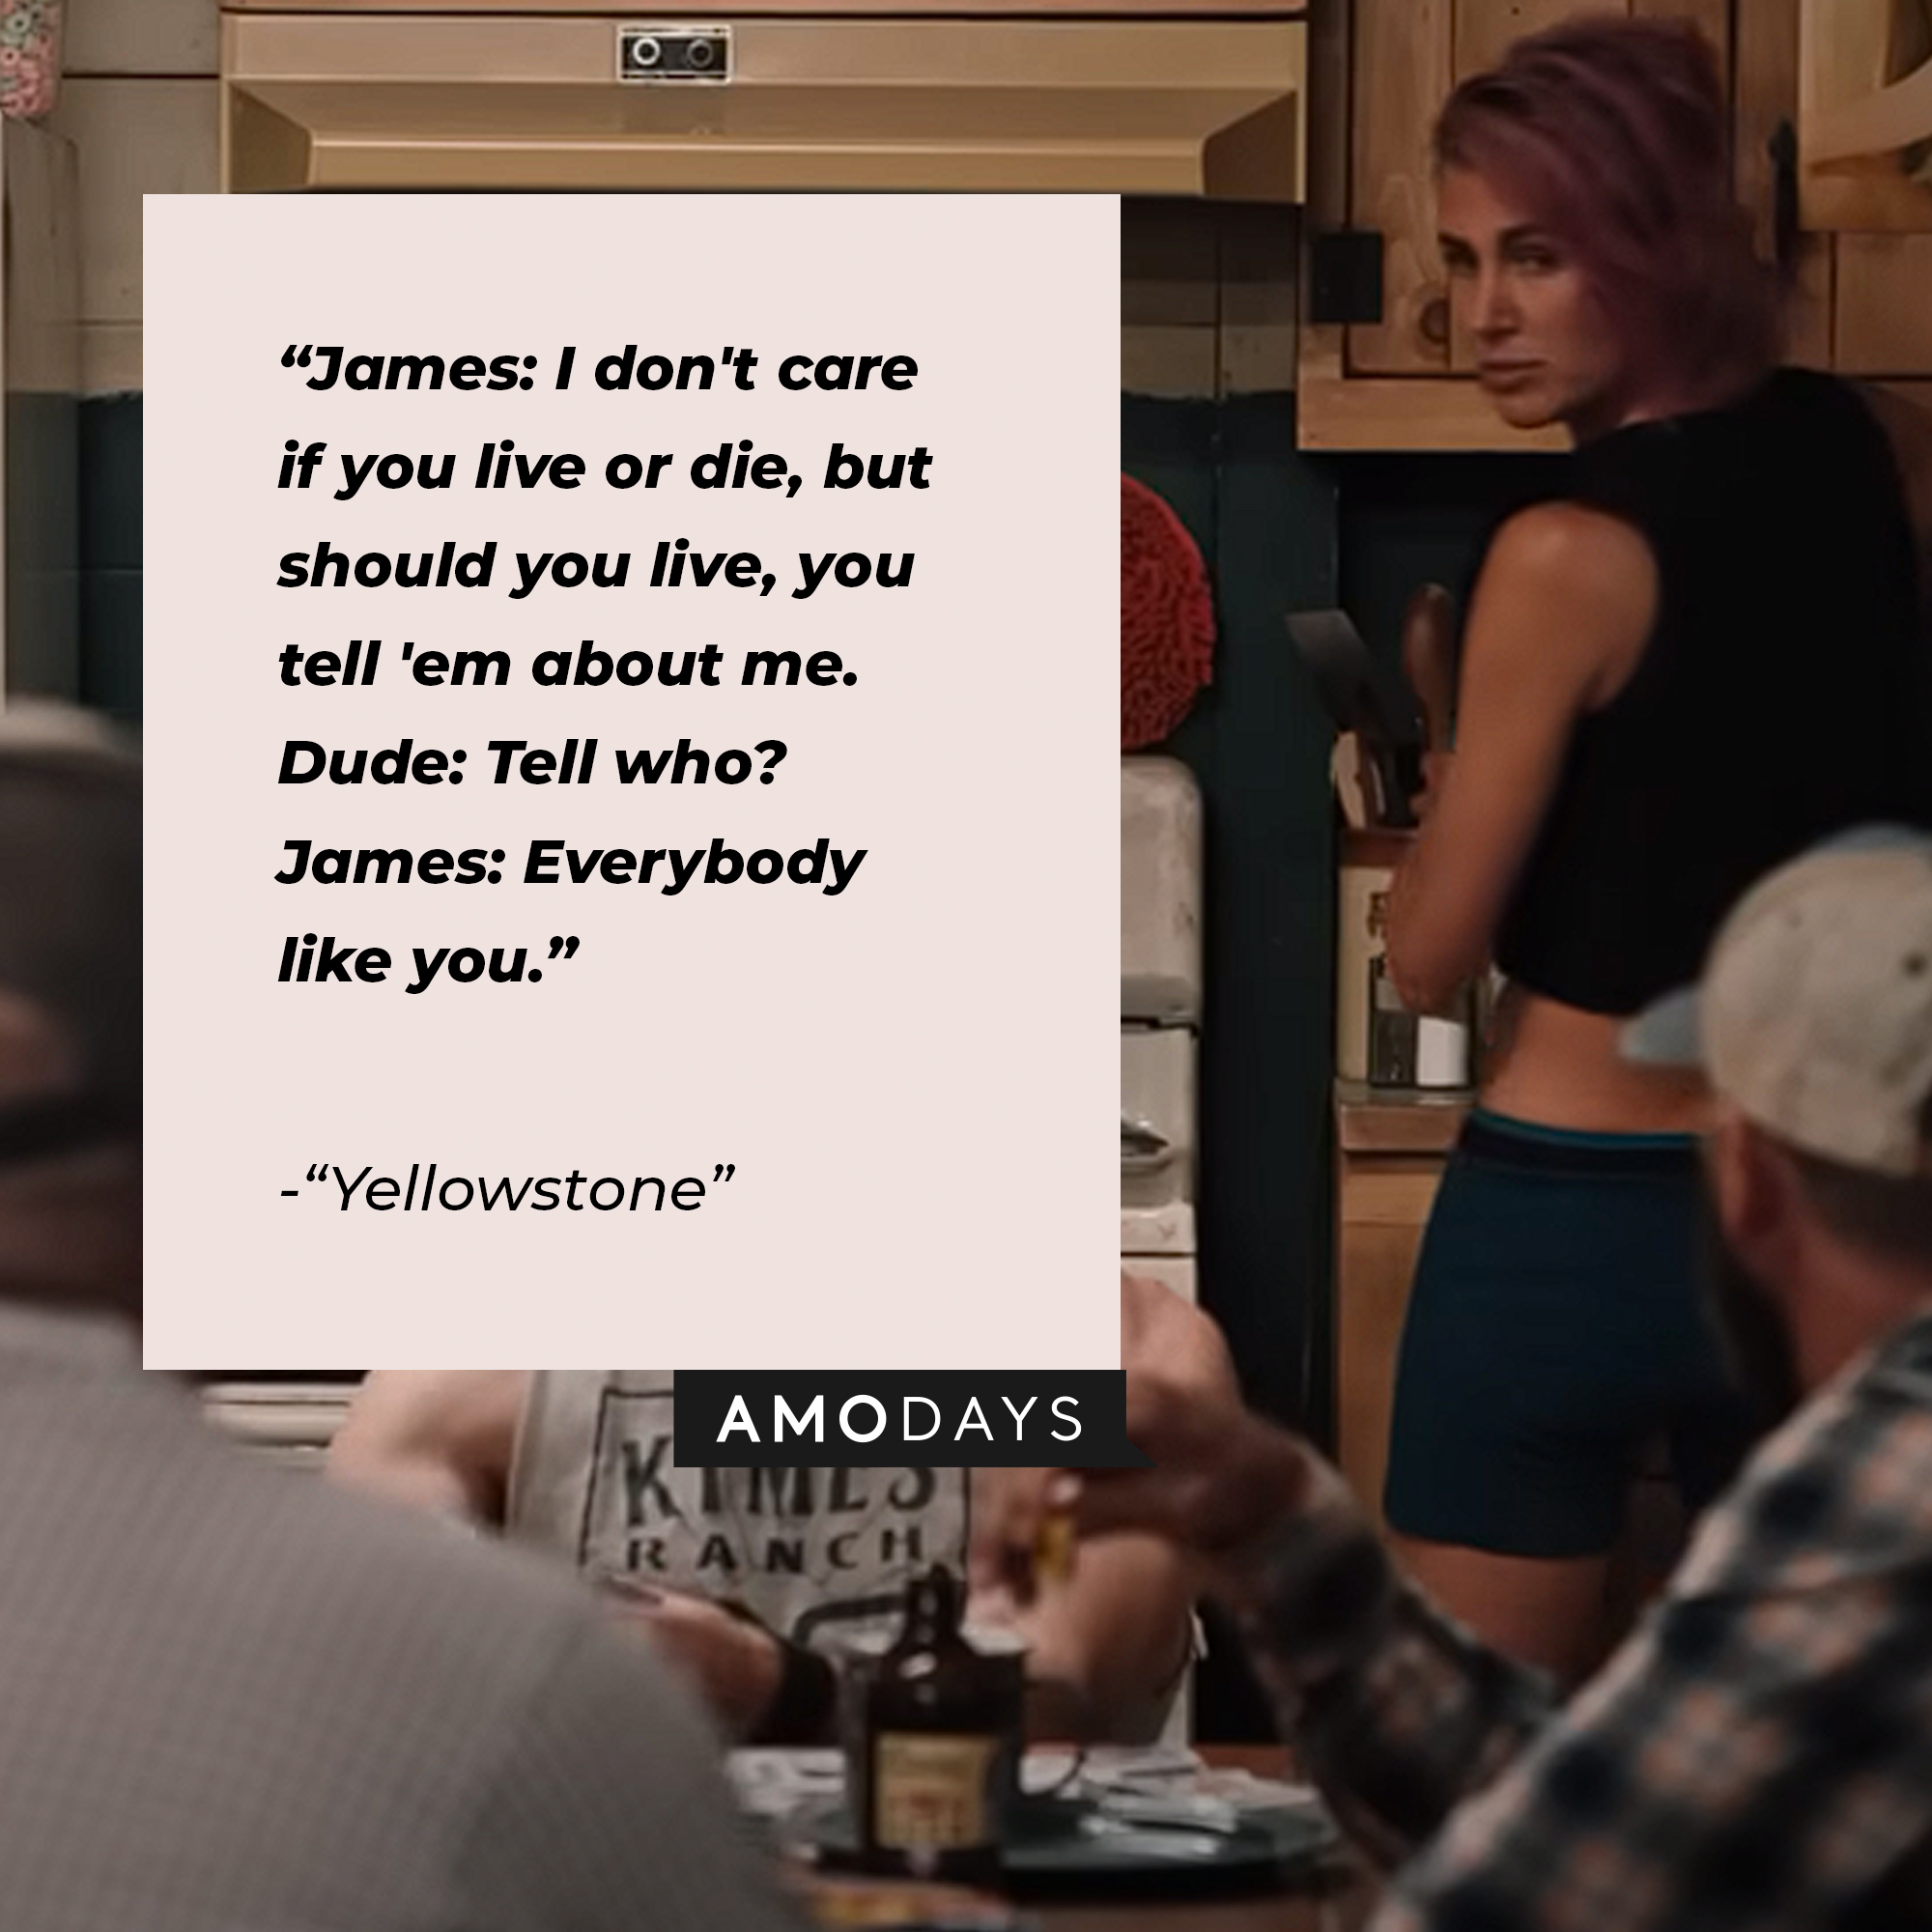 Quote from “Yellowstone”: “James: I don't care if you live or die, but should you live, you tell 'em about me. Dude: Tell who? James: Everybody like you.” | Source: youtube.com/yellowstone